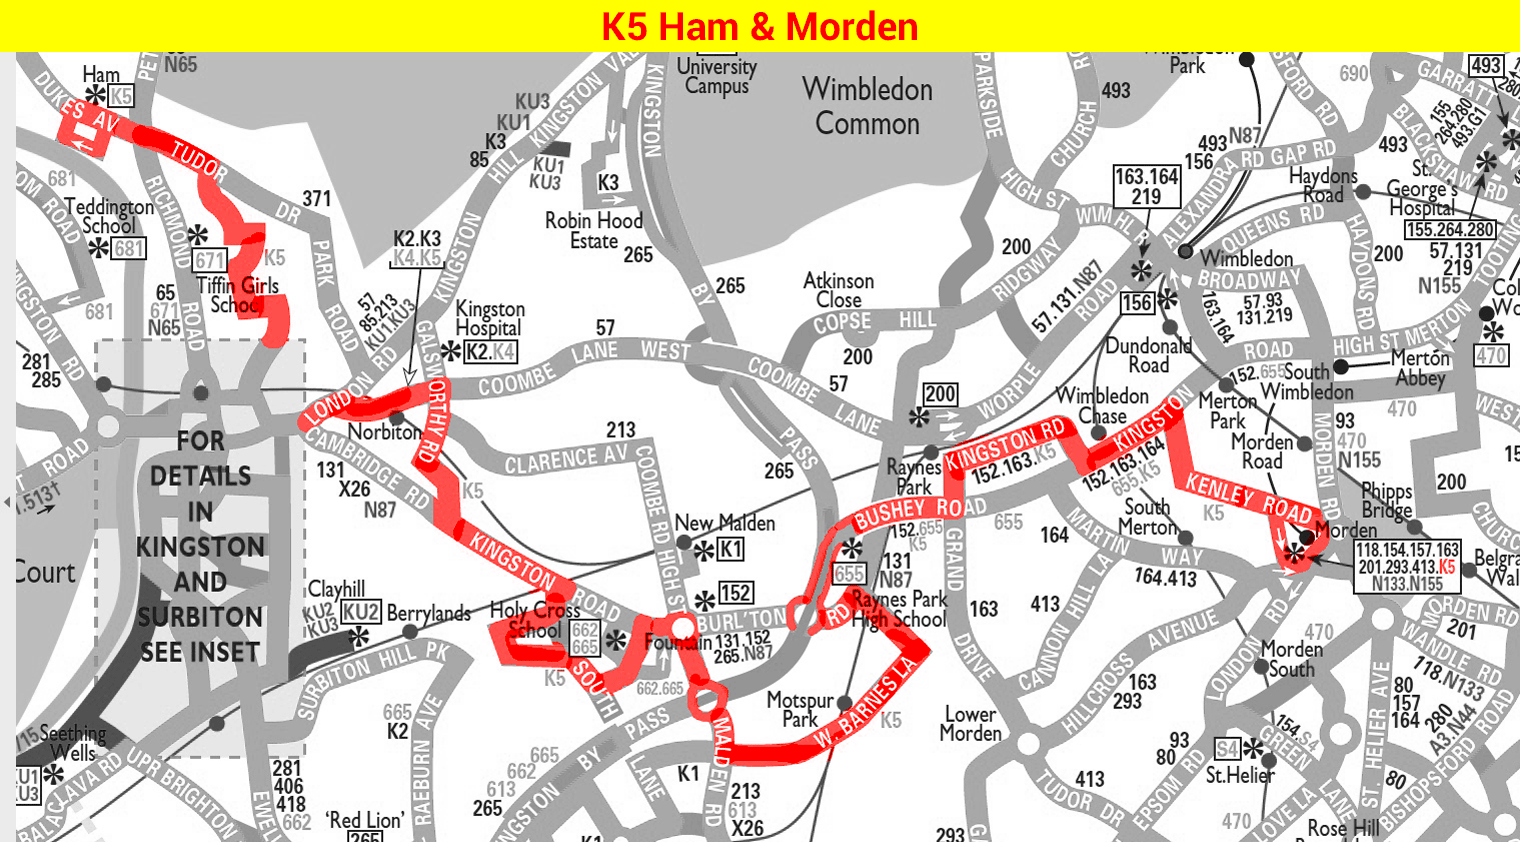 Route K5 map December 2019